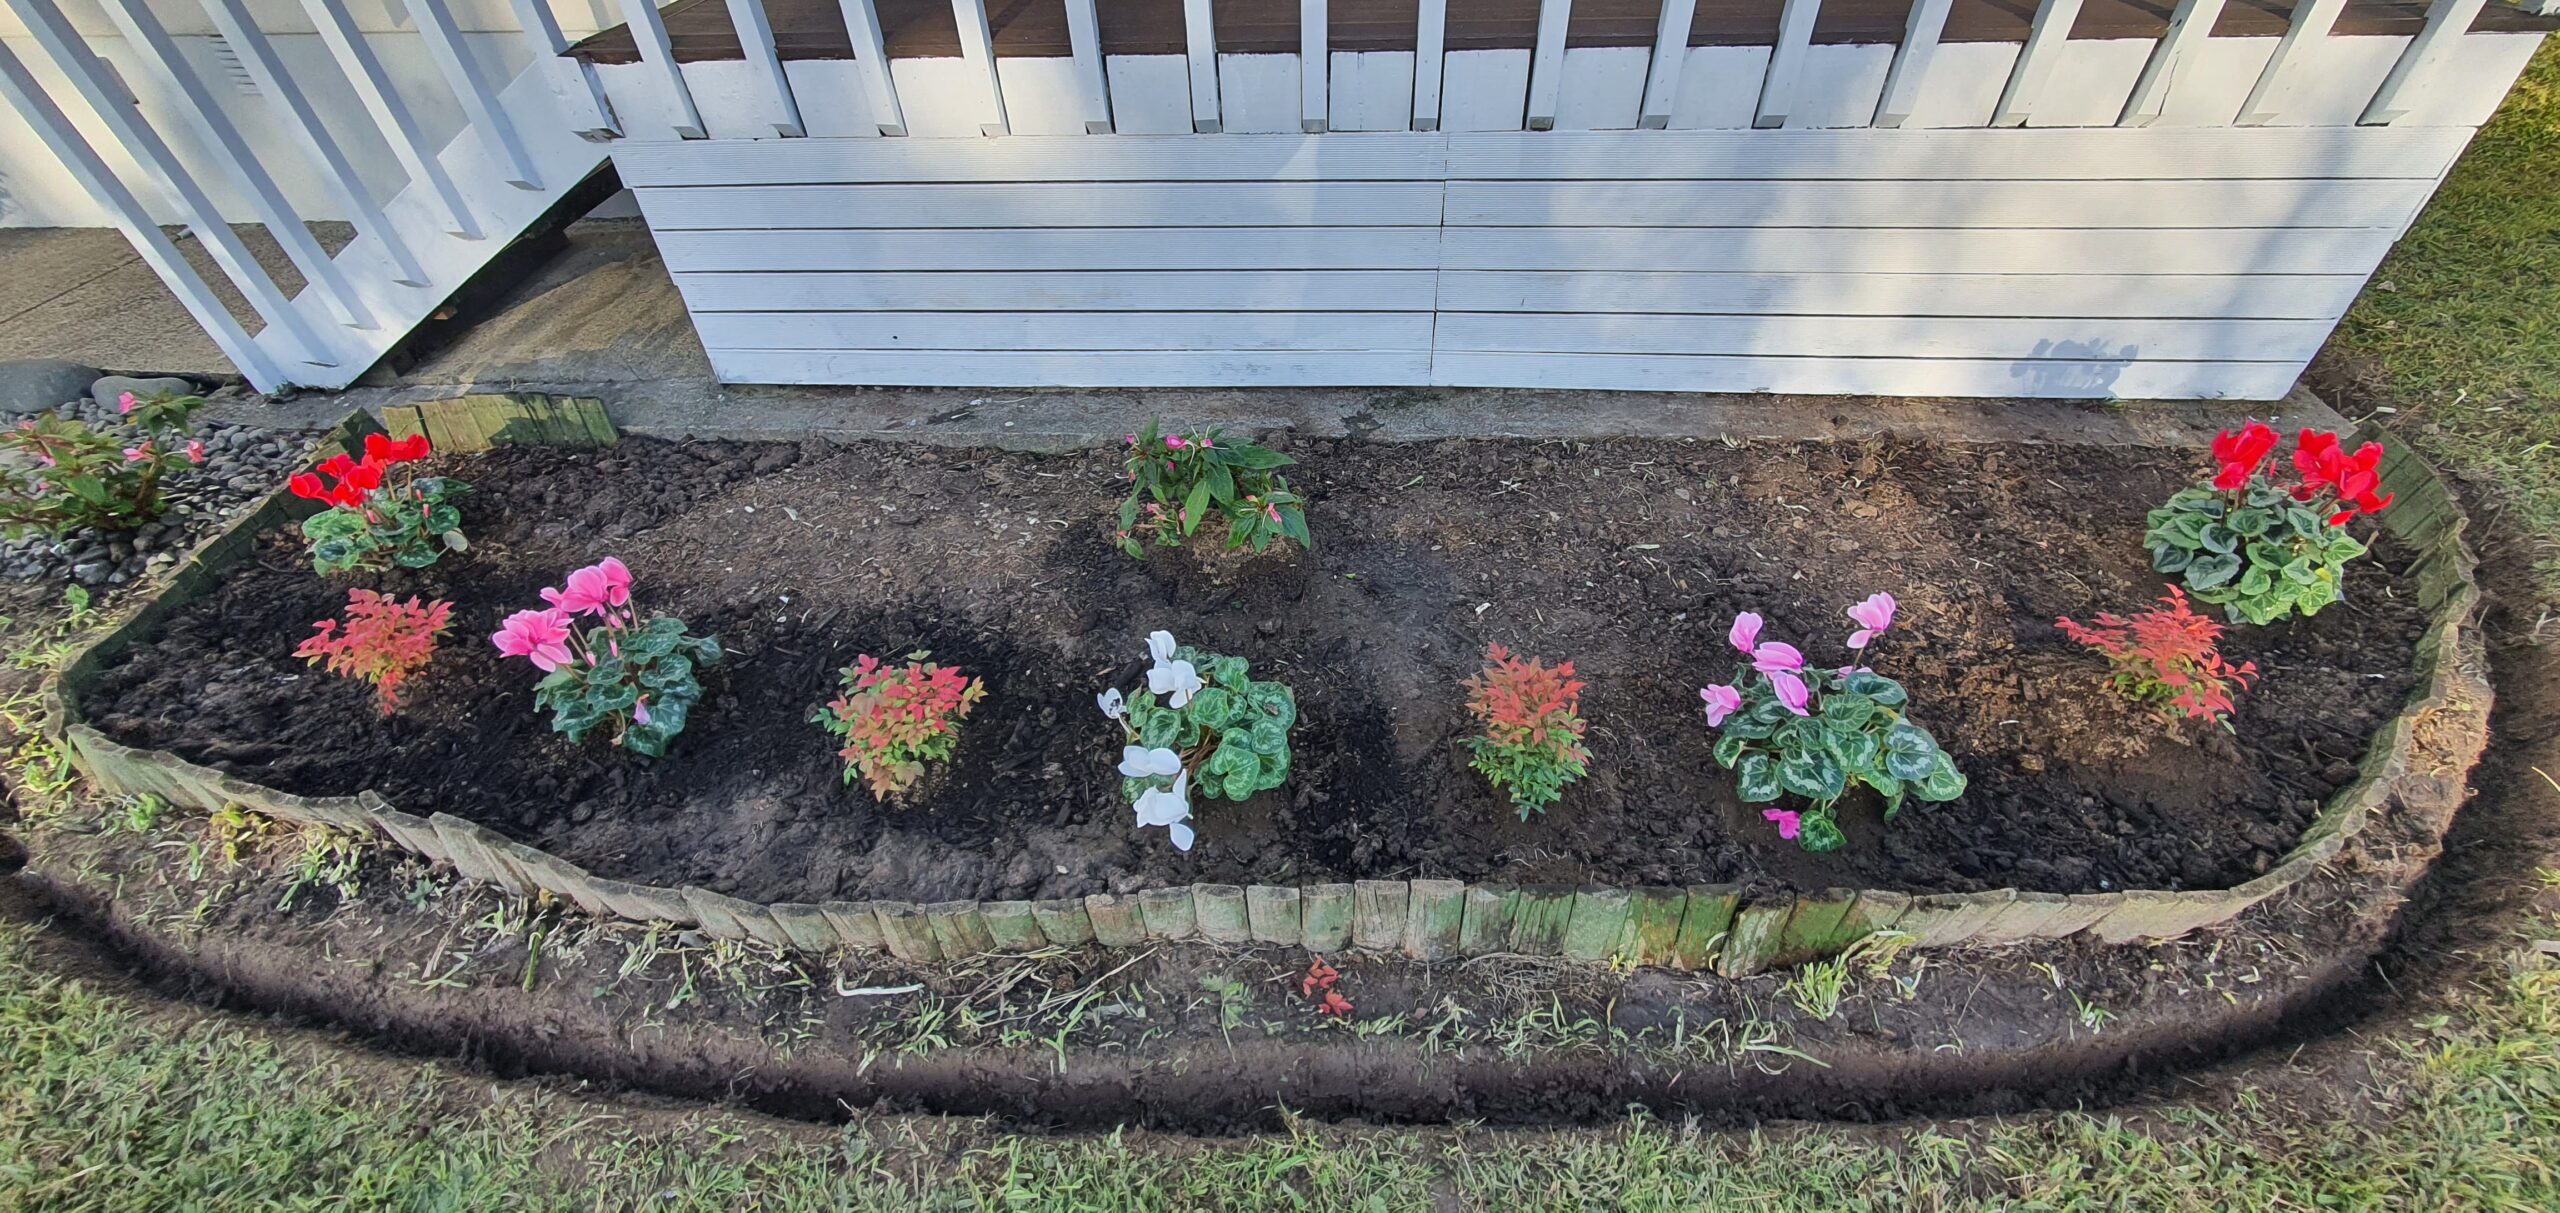 An overhead view of a newly planted flower bed bordered by wood logs at a home, featuring rows of vibrant red, pink, and white flowers in front of a white lattice fence.